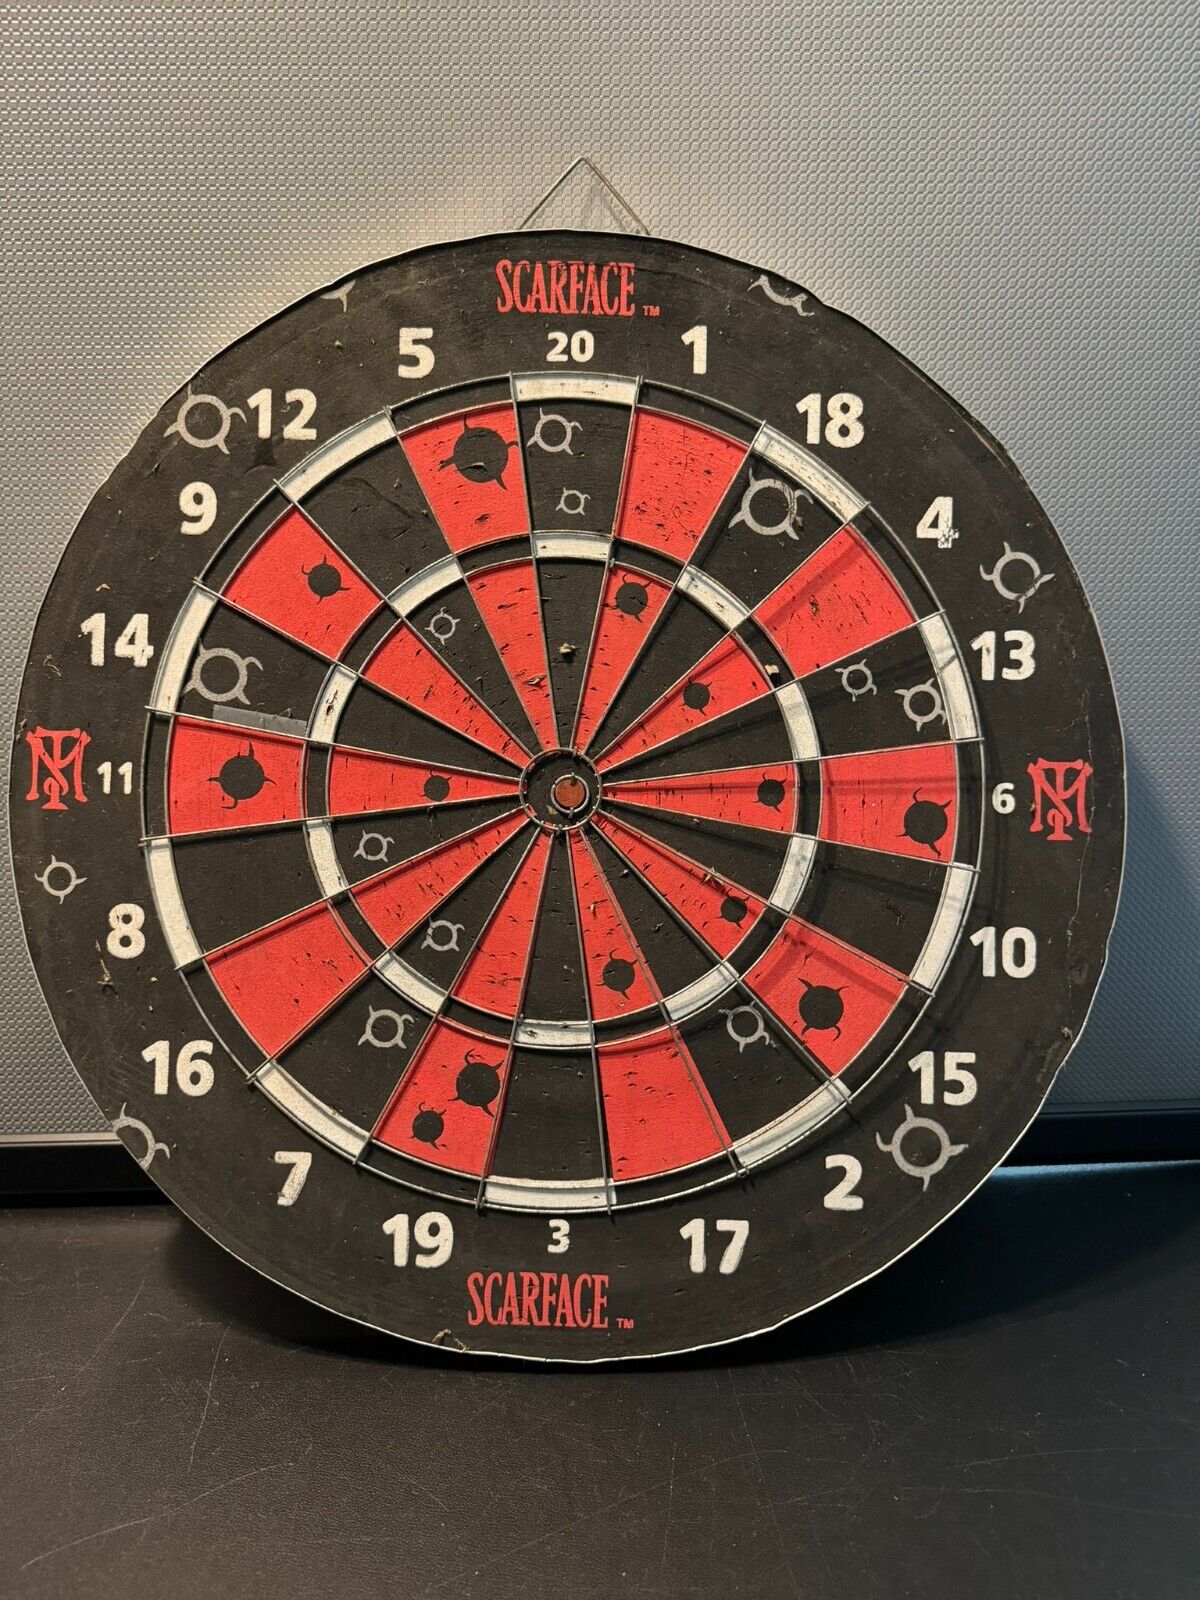 Scarface Vintage dart Board With 8 Darts